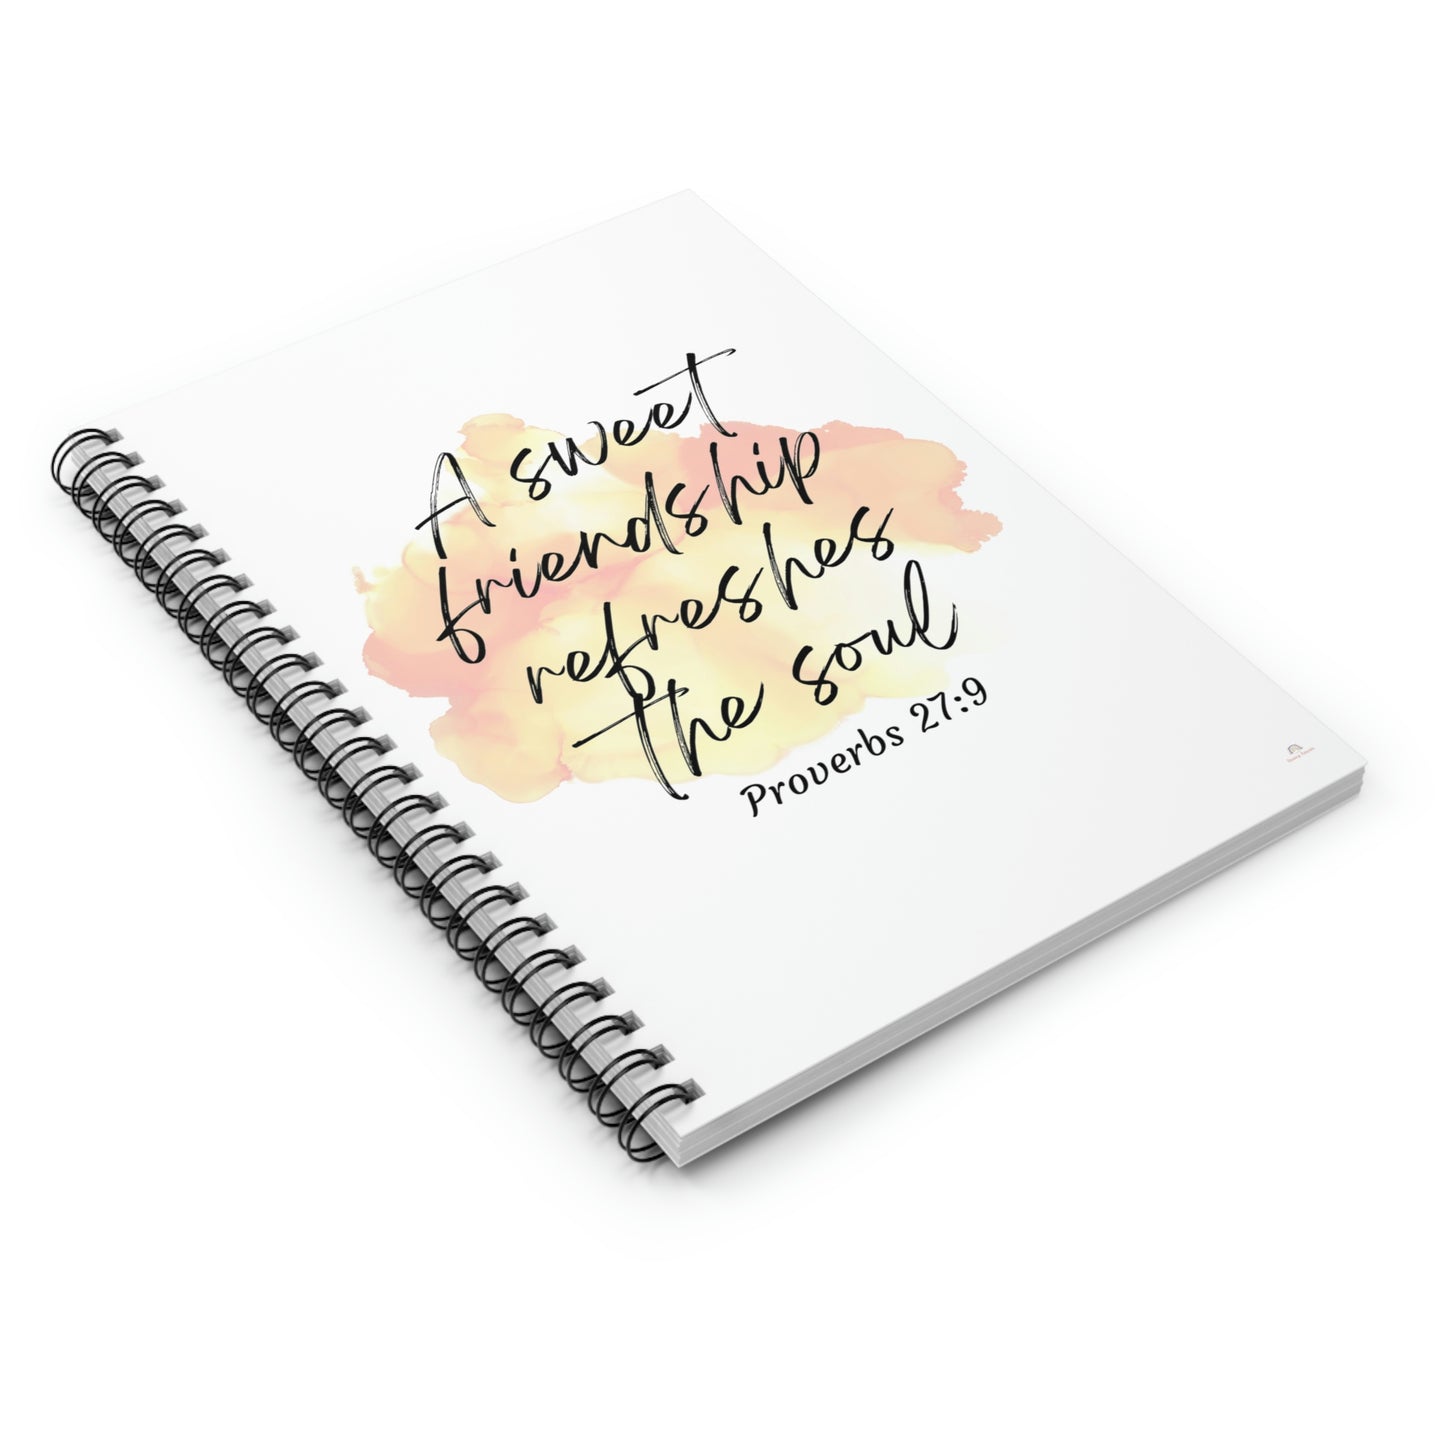 A sweet friendship refreshes the soul Spiral Notebook - Ruled Line